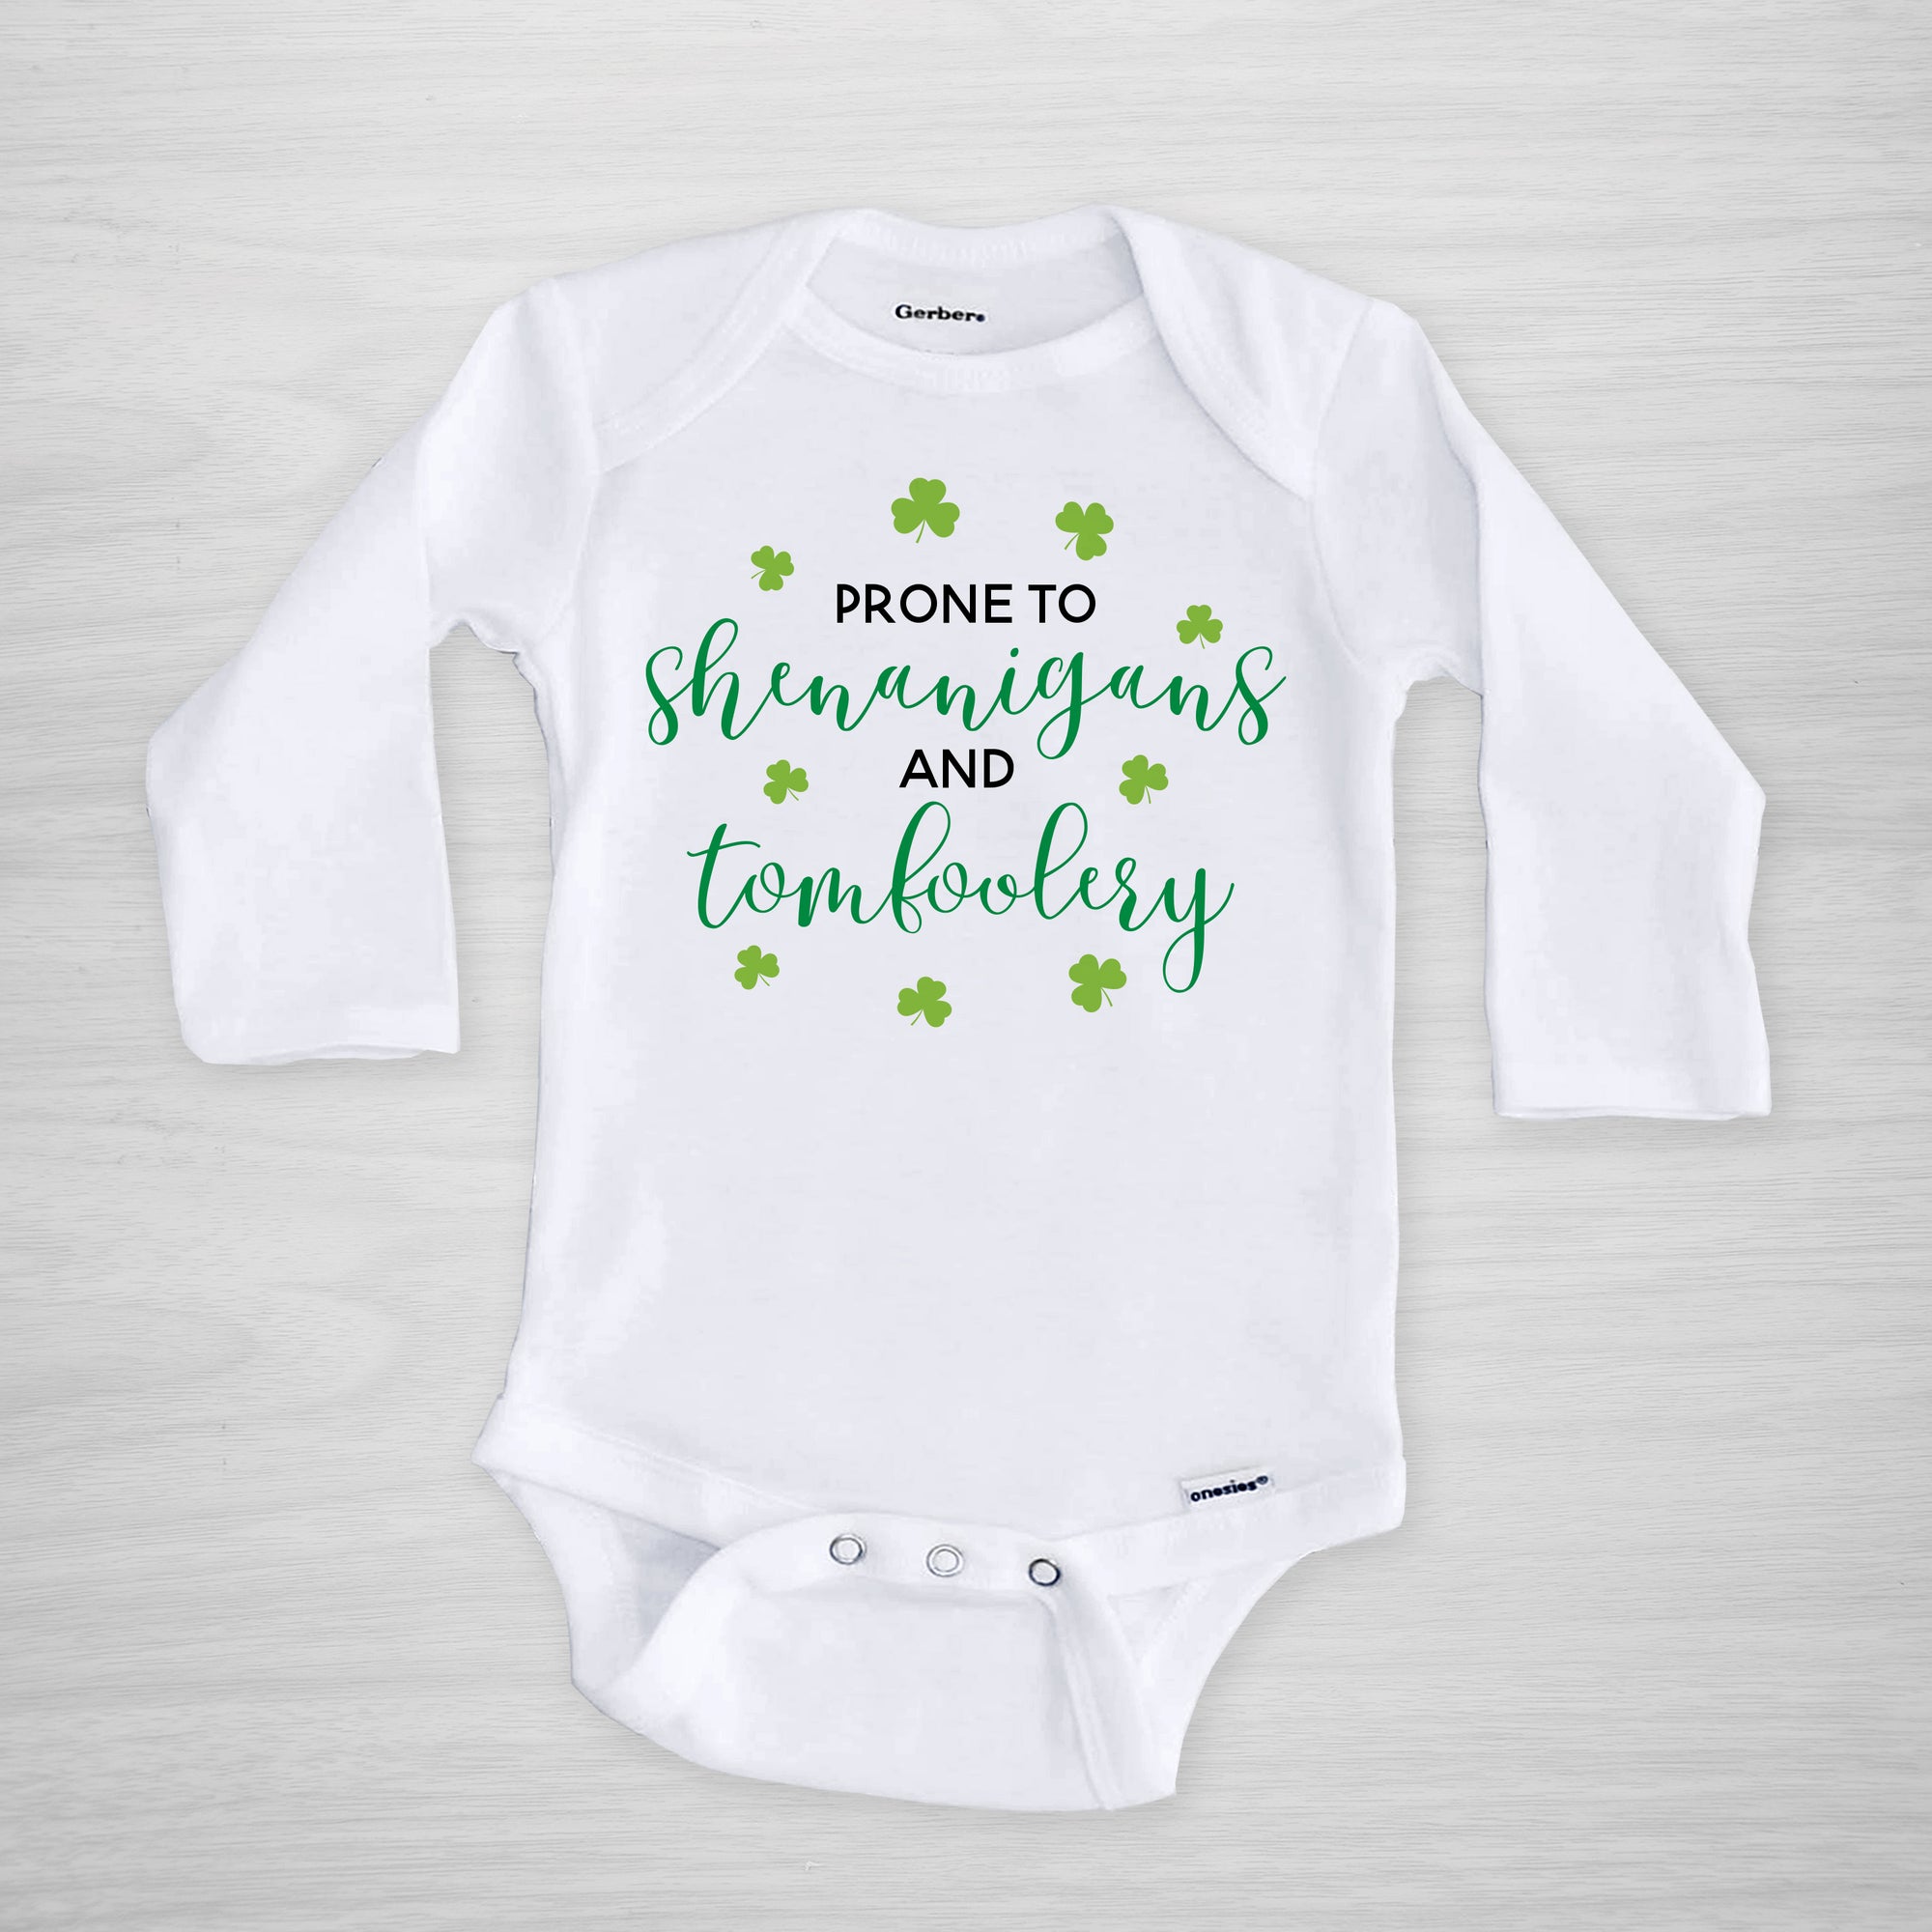 Prone to Shenanigans and Tomfoolery St. Patrick's Day Gerber Onesie, long sleeved